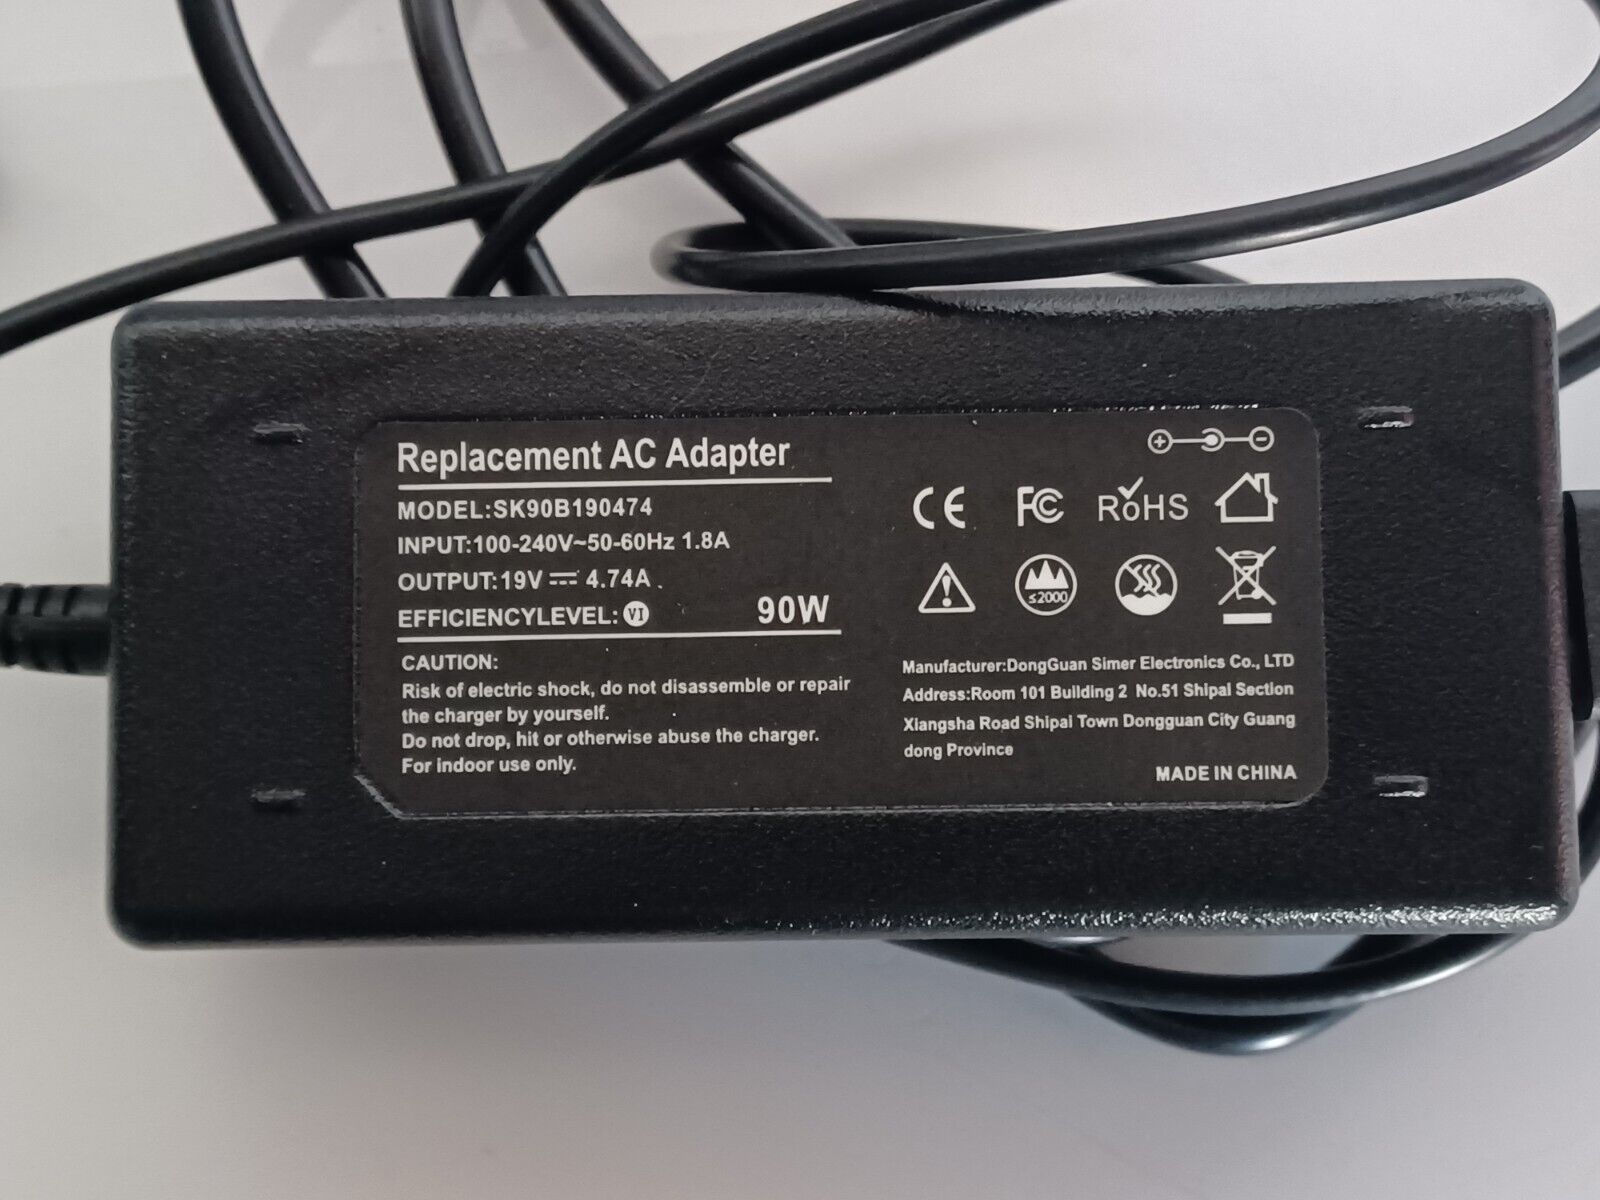 Replacement AC Adapter SK90B190474 19V 4.74A 90W